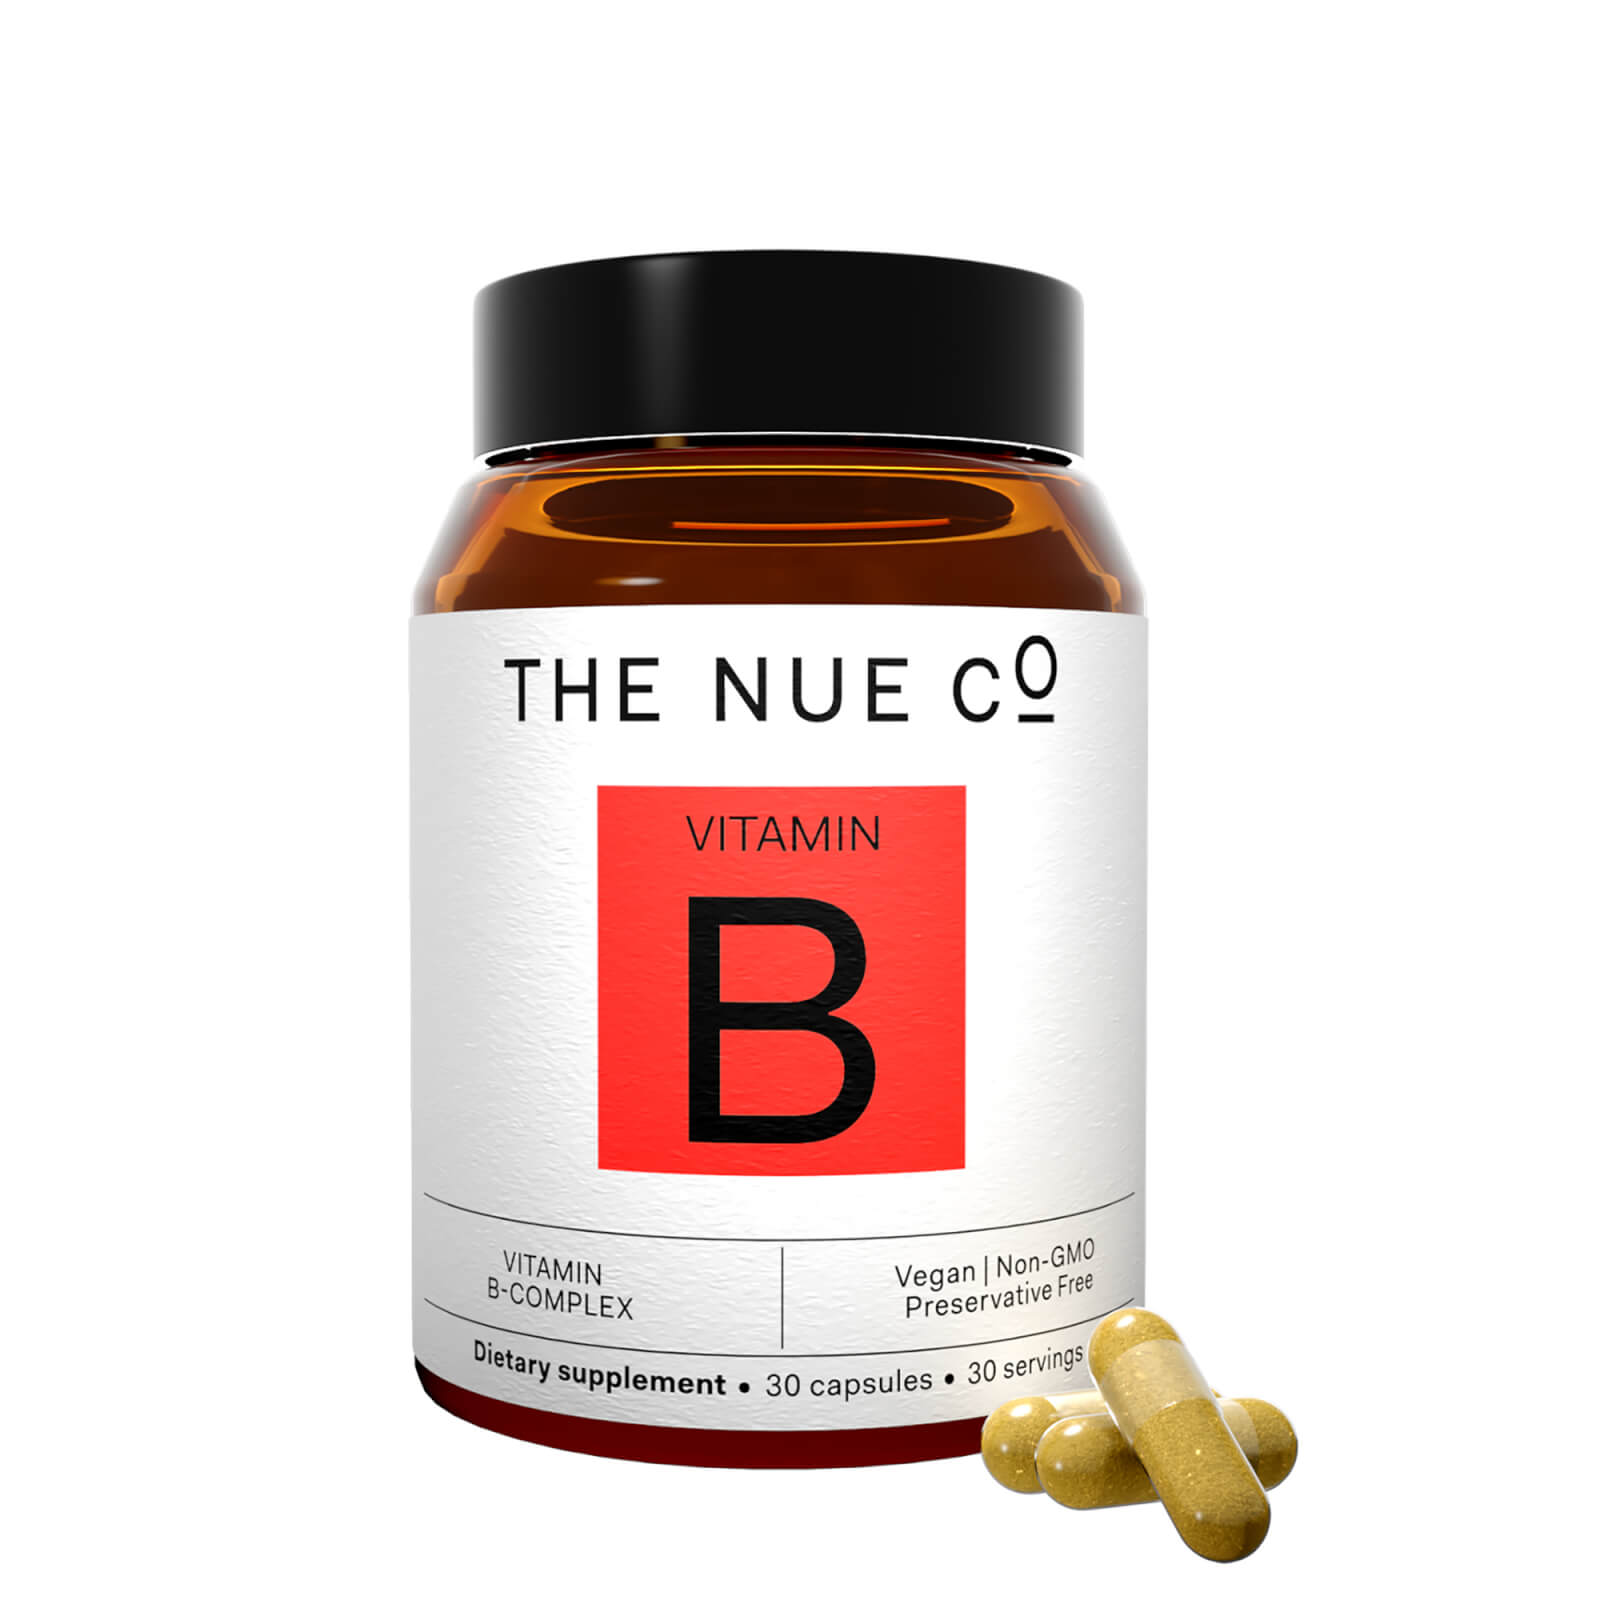 Photos - Vitamins & Minerals The Nue Co. Vitamin B Supplement To Improve Energy (30 Capsules)